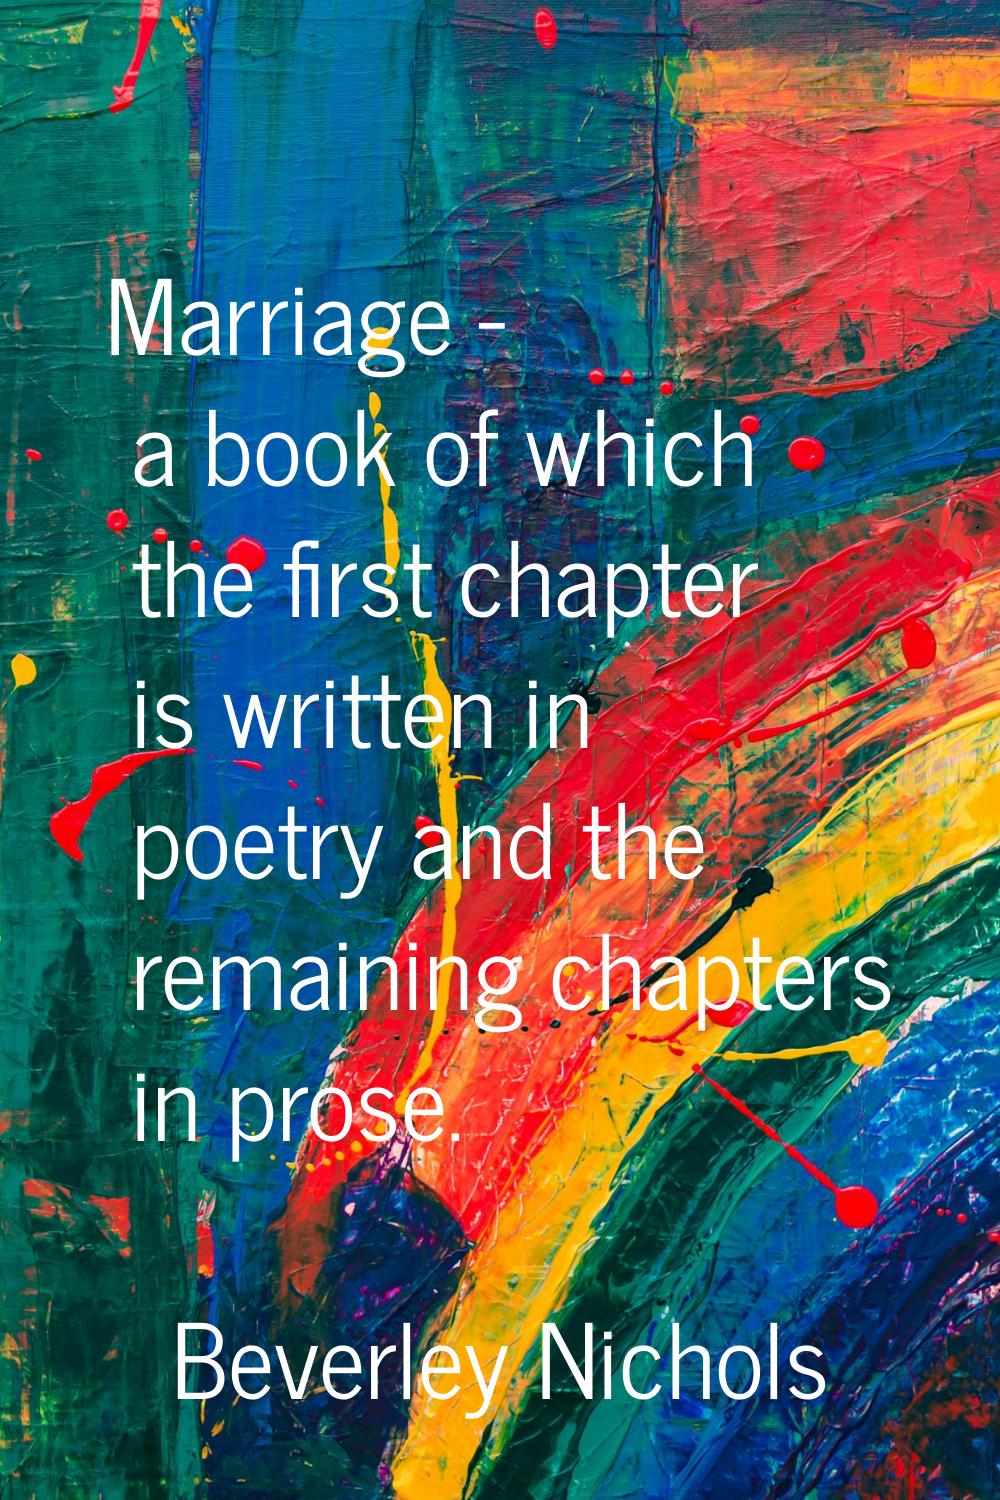 Marriage - a book of which the first chapter is written in poetry and the remaining chapters in pro